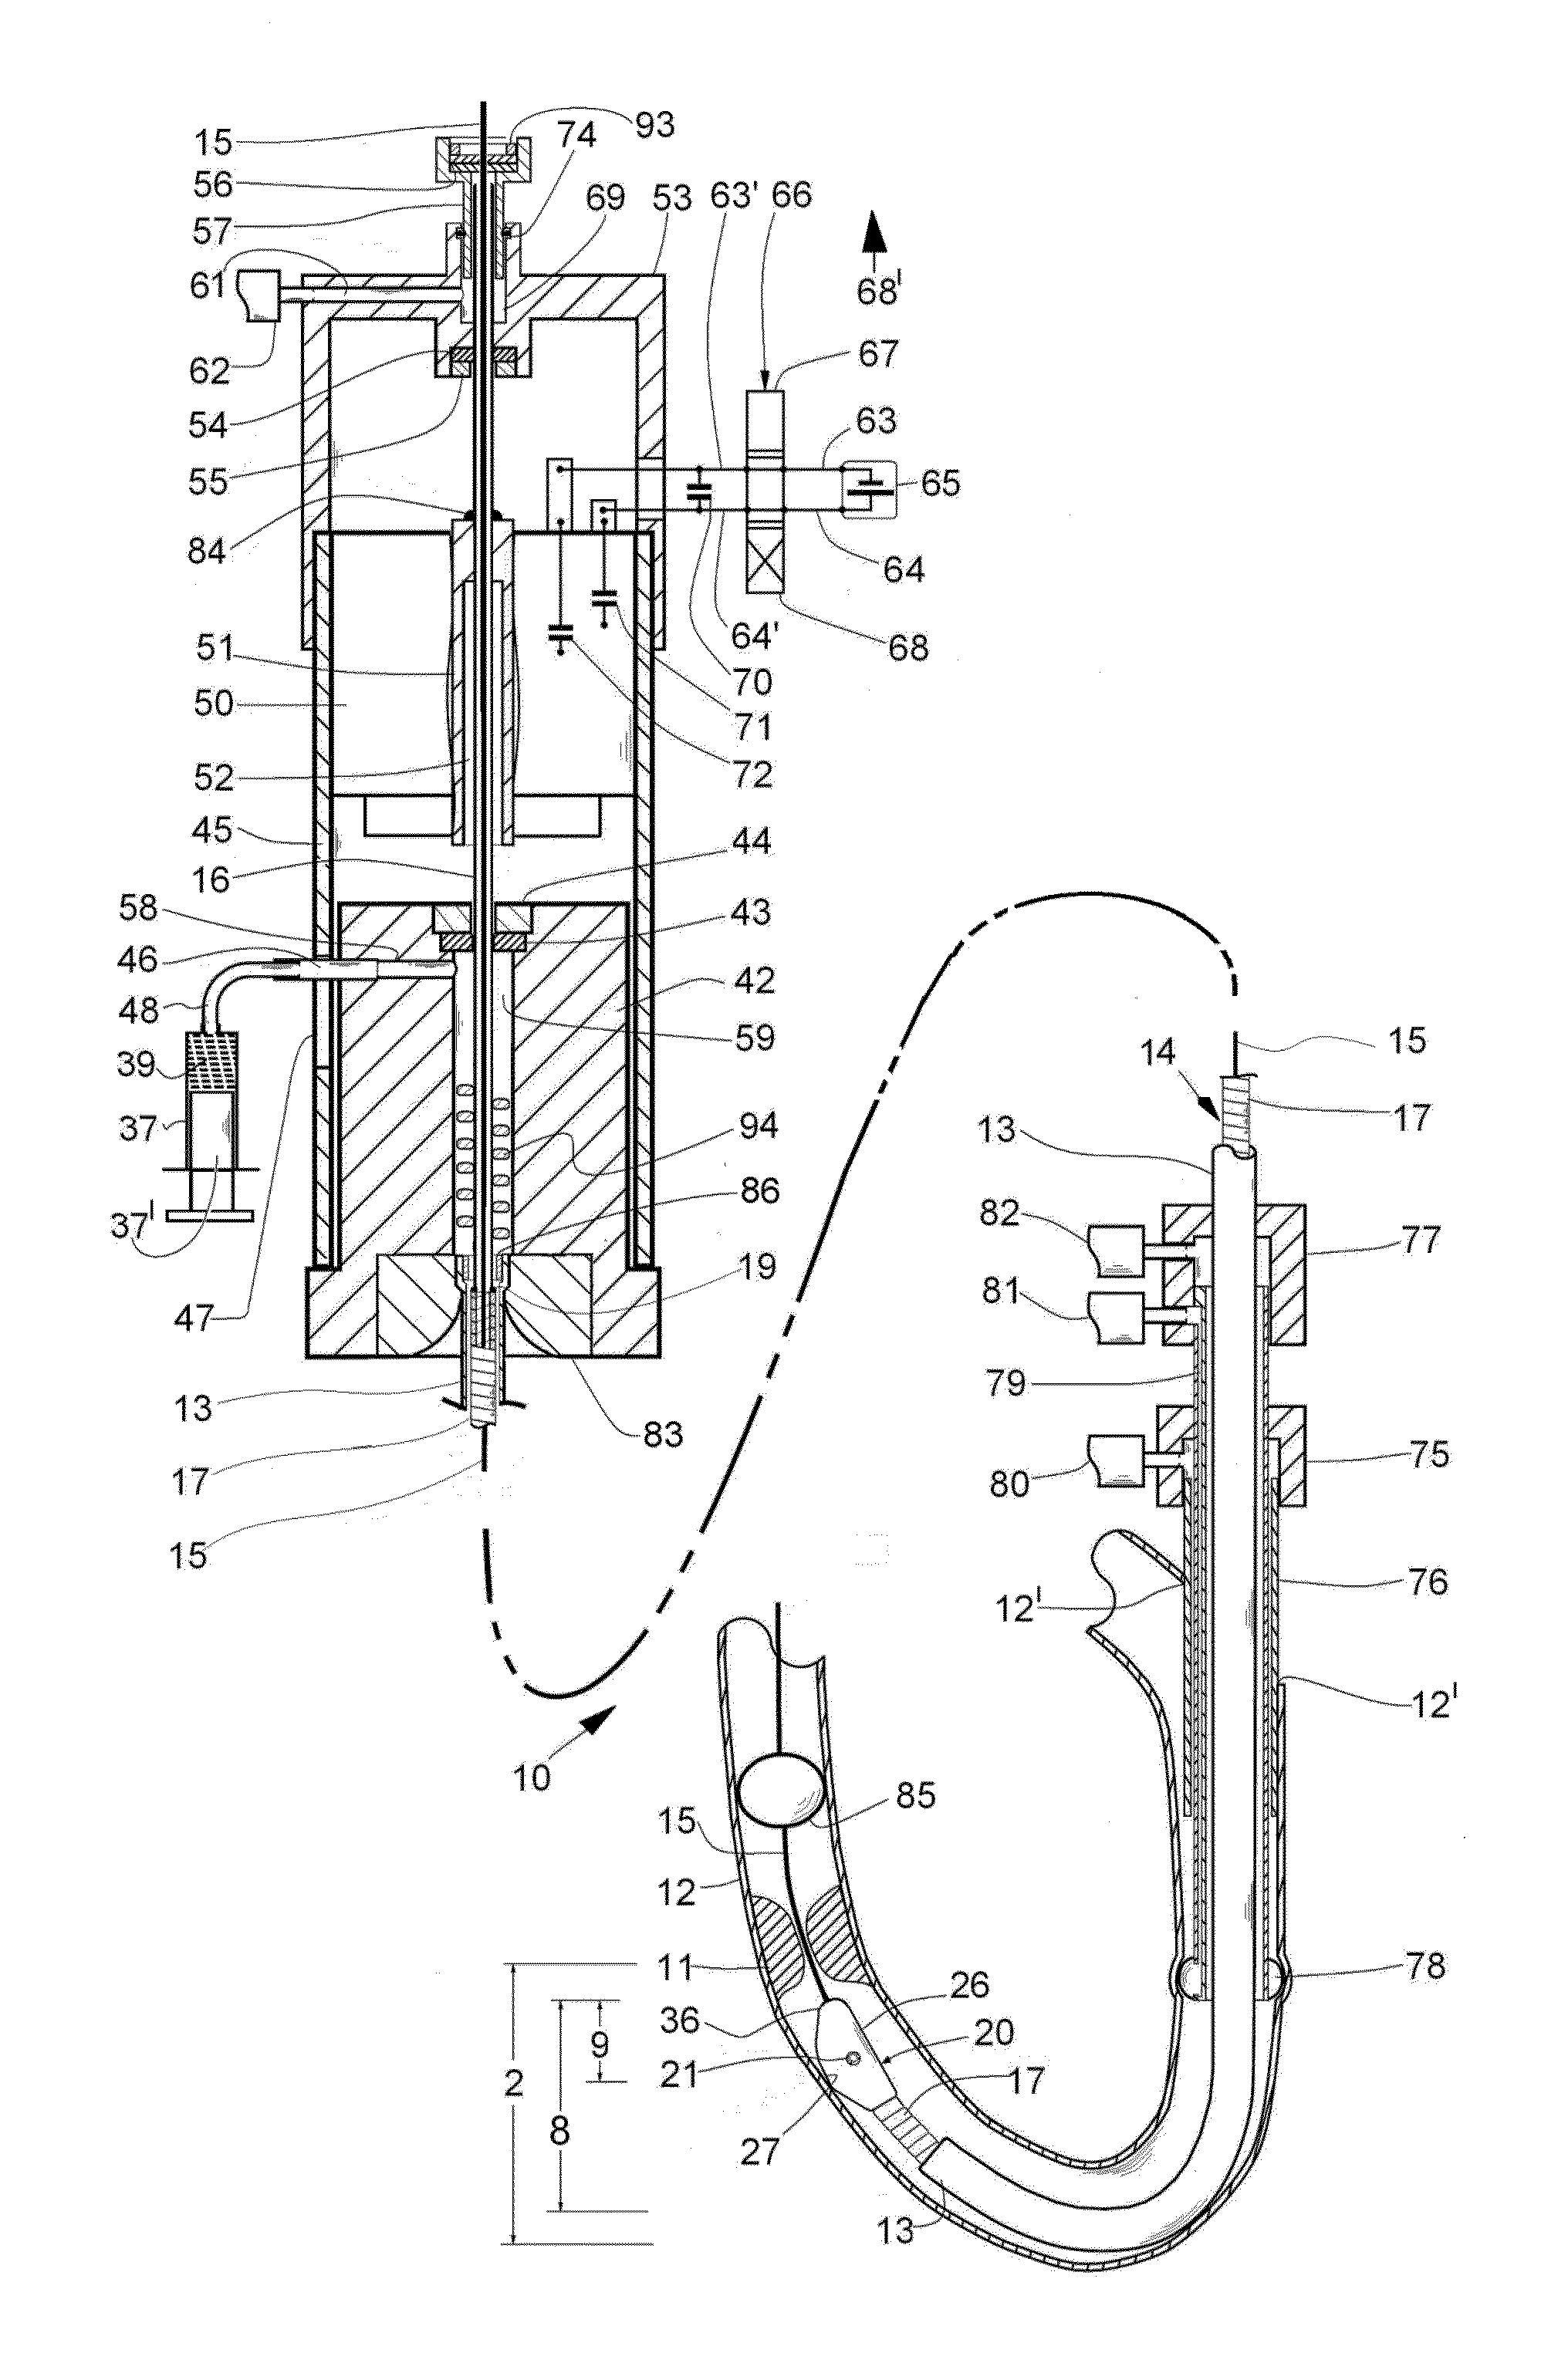 Mechanical - pharmaceutical system for opening obstructed bodily vessels